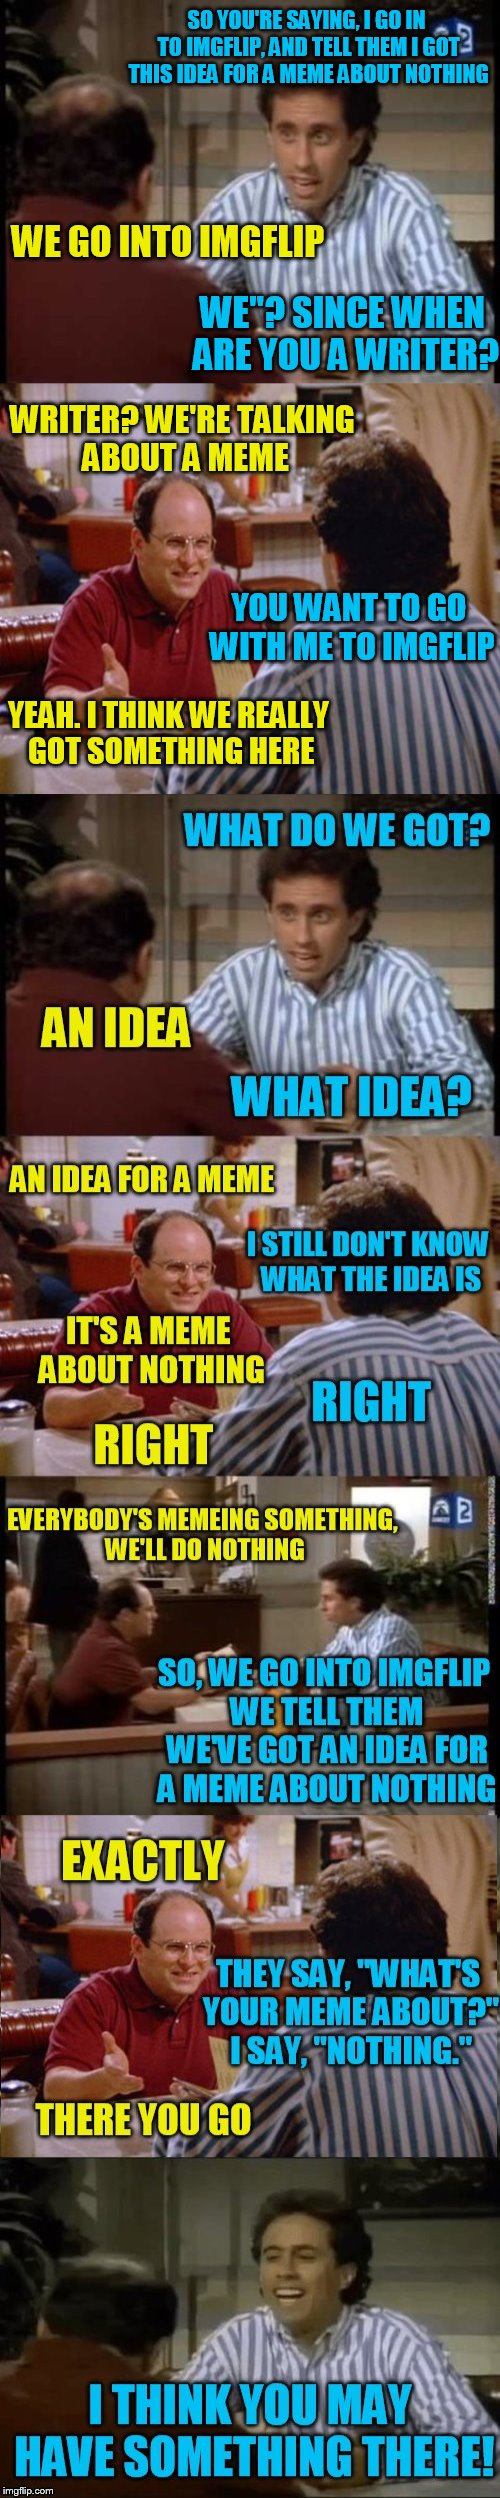 If I cant come up with meme about something, I might as well meme about nothing :) |  SO YOU'RE SAYING, I GO IN TO IMGFLIP, AND TELL THEM I GOT THIS IDEA FOR A MEME ABOUT NOTHING; WE GO INTO IMGFLIP; WE"? SINCE WHEN ARE YOU A WRITER? WRITER? WE'RE TALKING ABOUT A MEME; YOU WANT TO GO WITH ME TO IMGFLIP; YEAH. I THINK WE REALLY GOT SOMETHING HERE; WHAT DO WE GOT? AN IDEA; WHAT IDEA? AN IDEA FOR A MEME; I STILL DON'T KNOW WHAT THE IDEA IS; IT'S A MEME ABOUT NOTHING; RIGHT; RIGHT; EVERYBODY'S MEMEING SOMETHING, WE'LL DO NOTHING; SO, WE GO INTO IMGFLIP WE TELL THEM WE'VE GOT AN IDEA FOR A MEME ABOUT NOTHING; EXACTLY; THEY SAY, "WHAT'S YOUR MEME ABOUT?" I SAY, "NOTHING."; THERE YOU GO; I THINK YOU MAY HAVE SOMETHING THERE! | image tagged in memes,seinfeld,the pitch,a meme about nothing,george costanza,imgflip | made w/ Imgflip meme maker